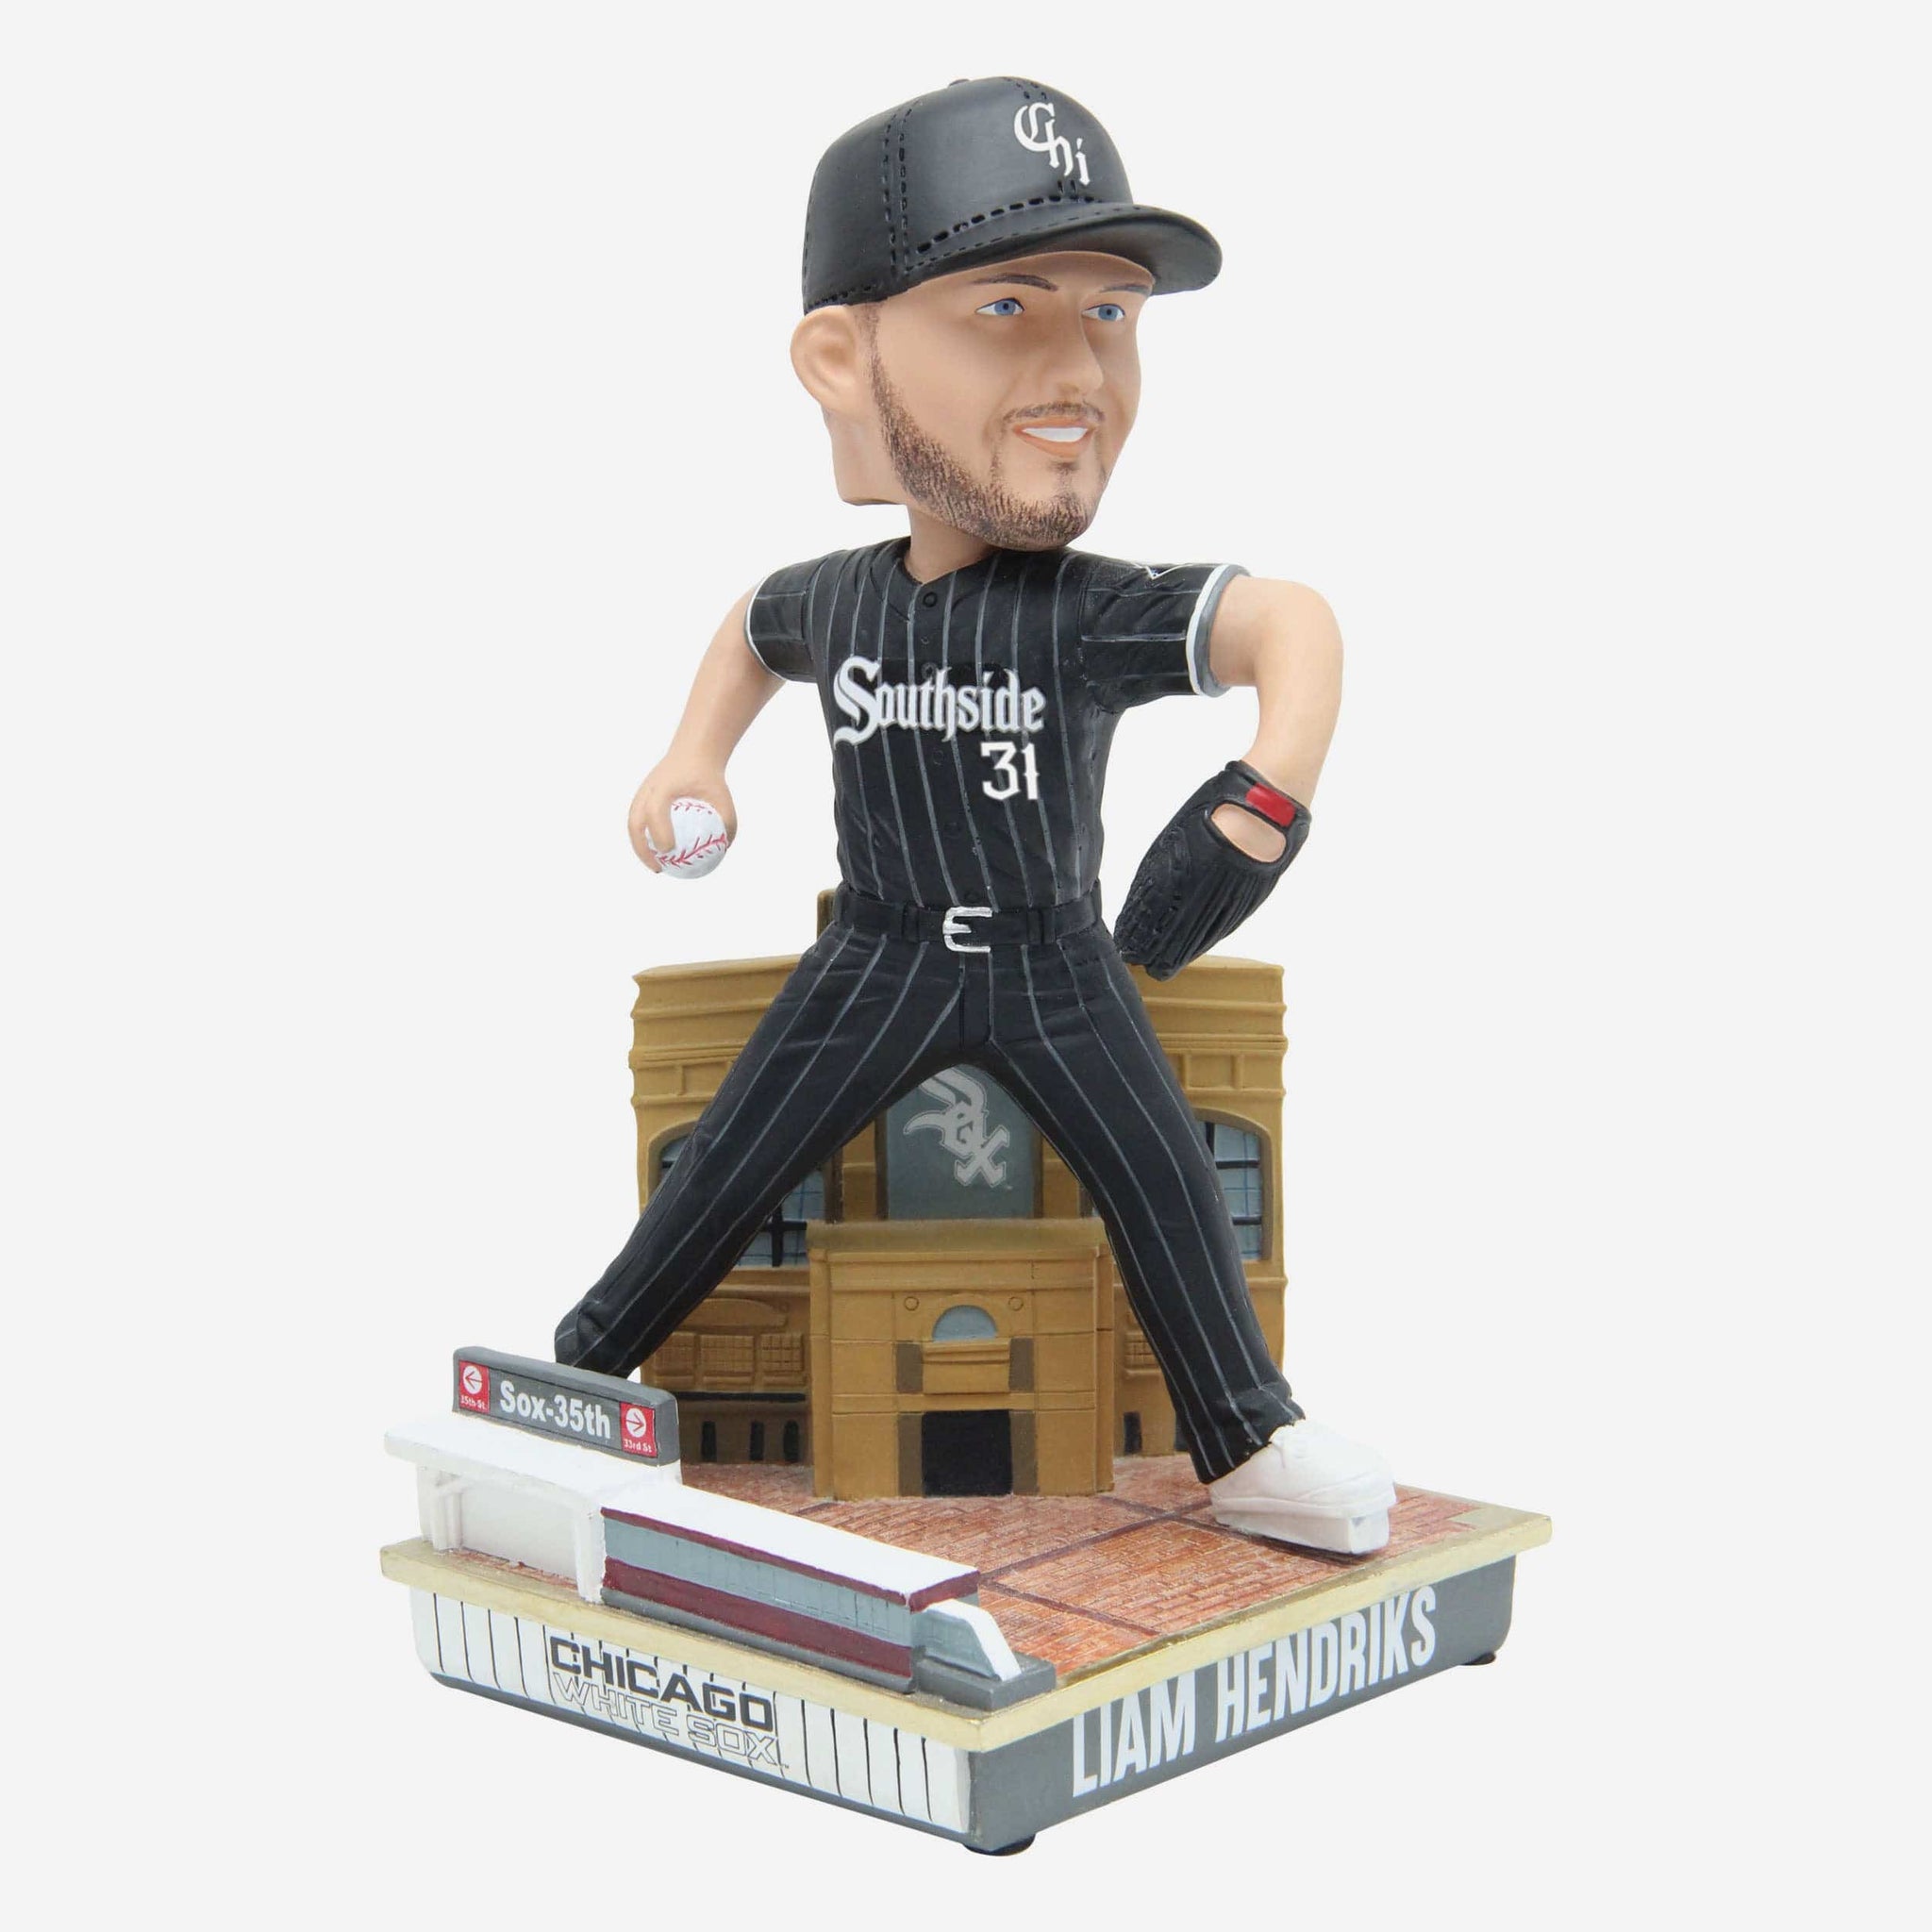 Official Chicago White Sox Bobbleheads, White Sox Figurines